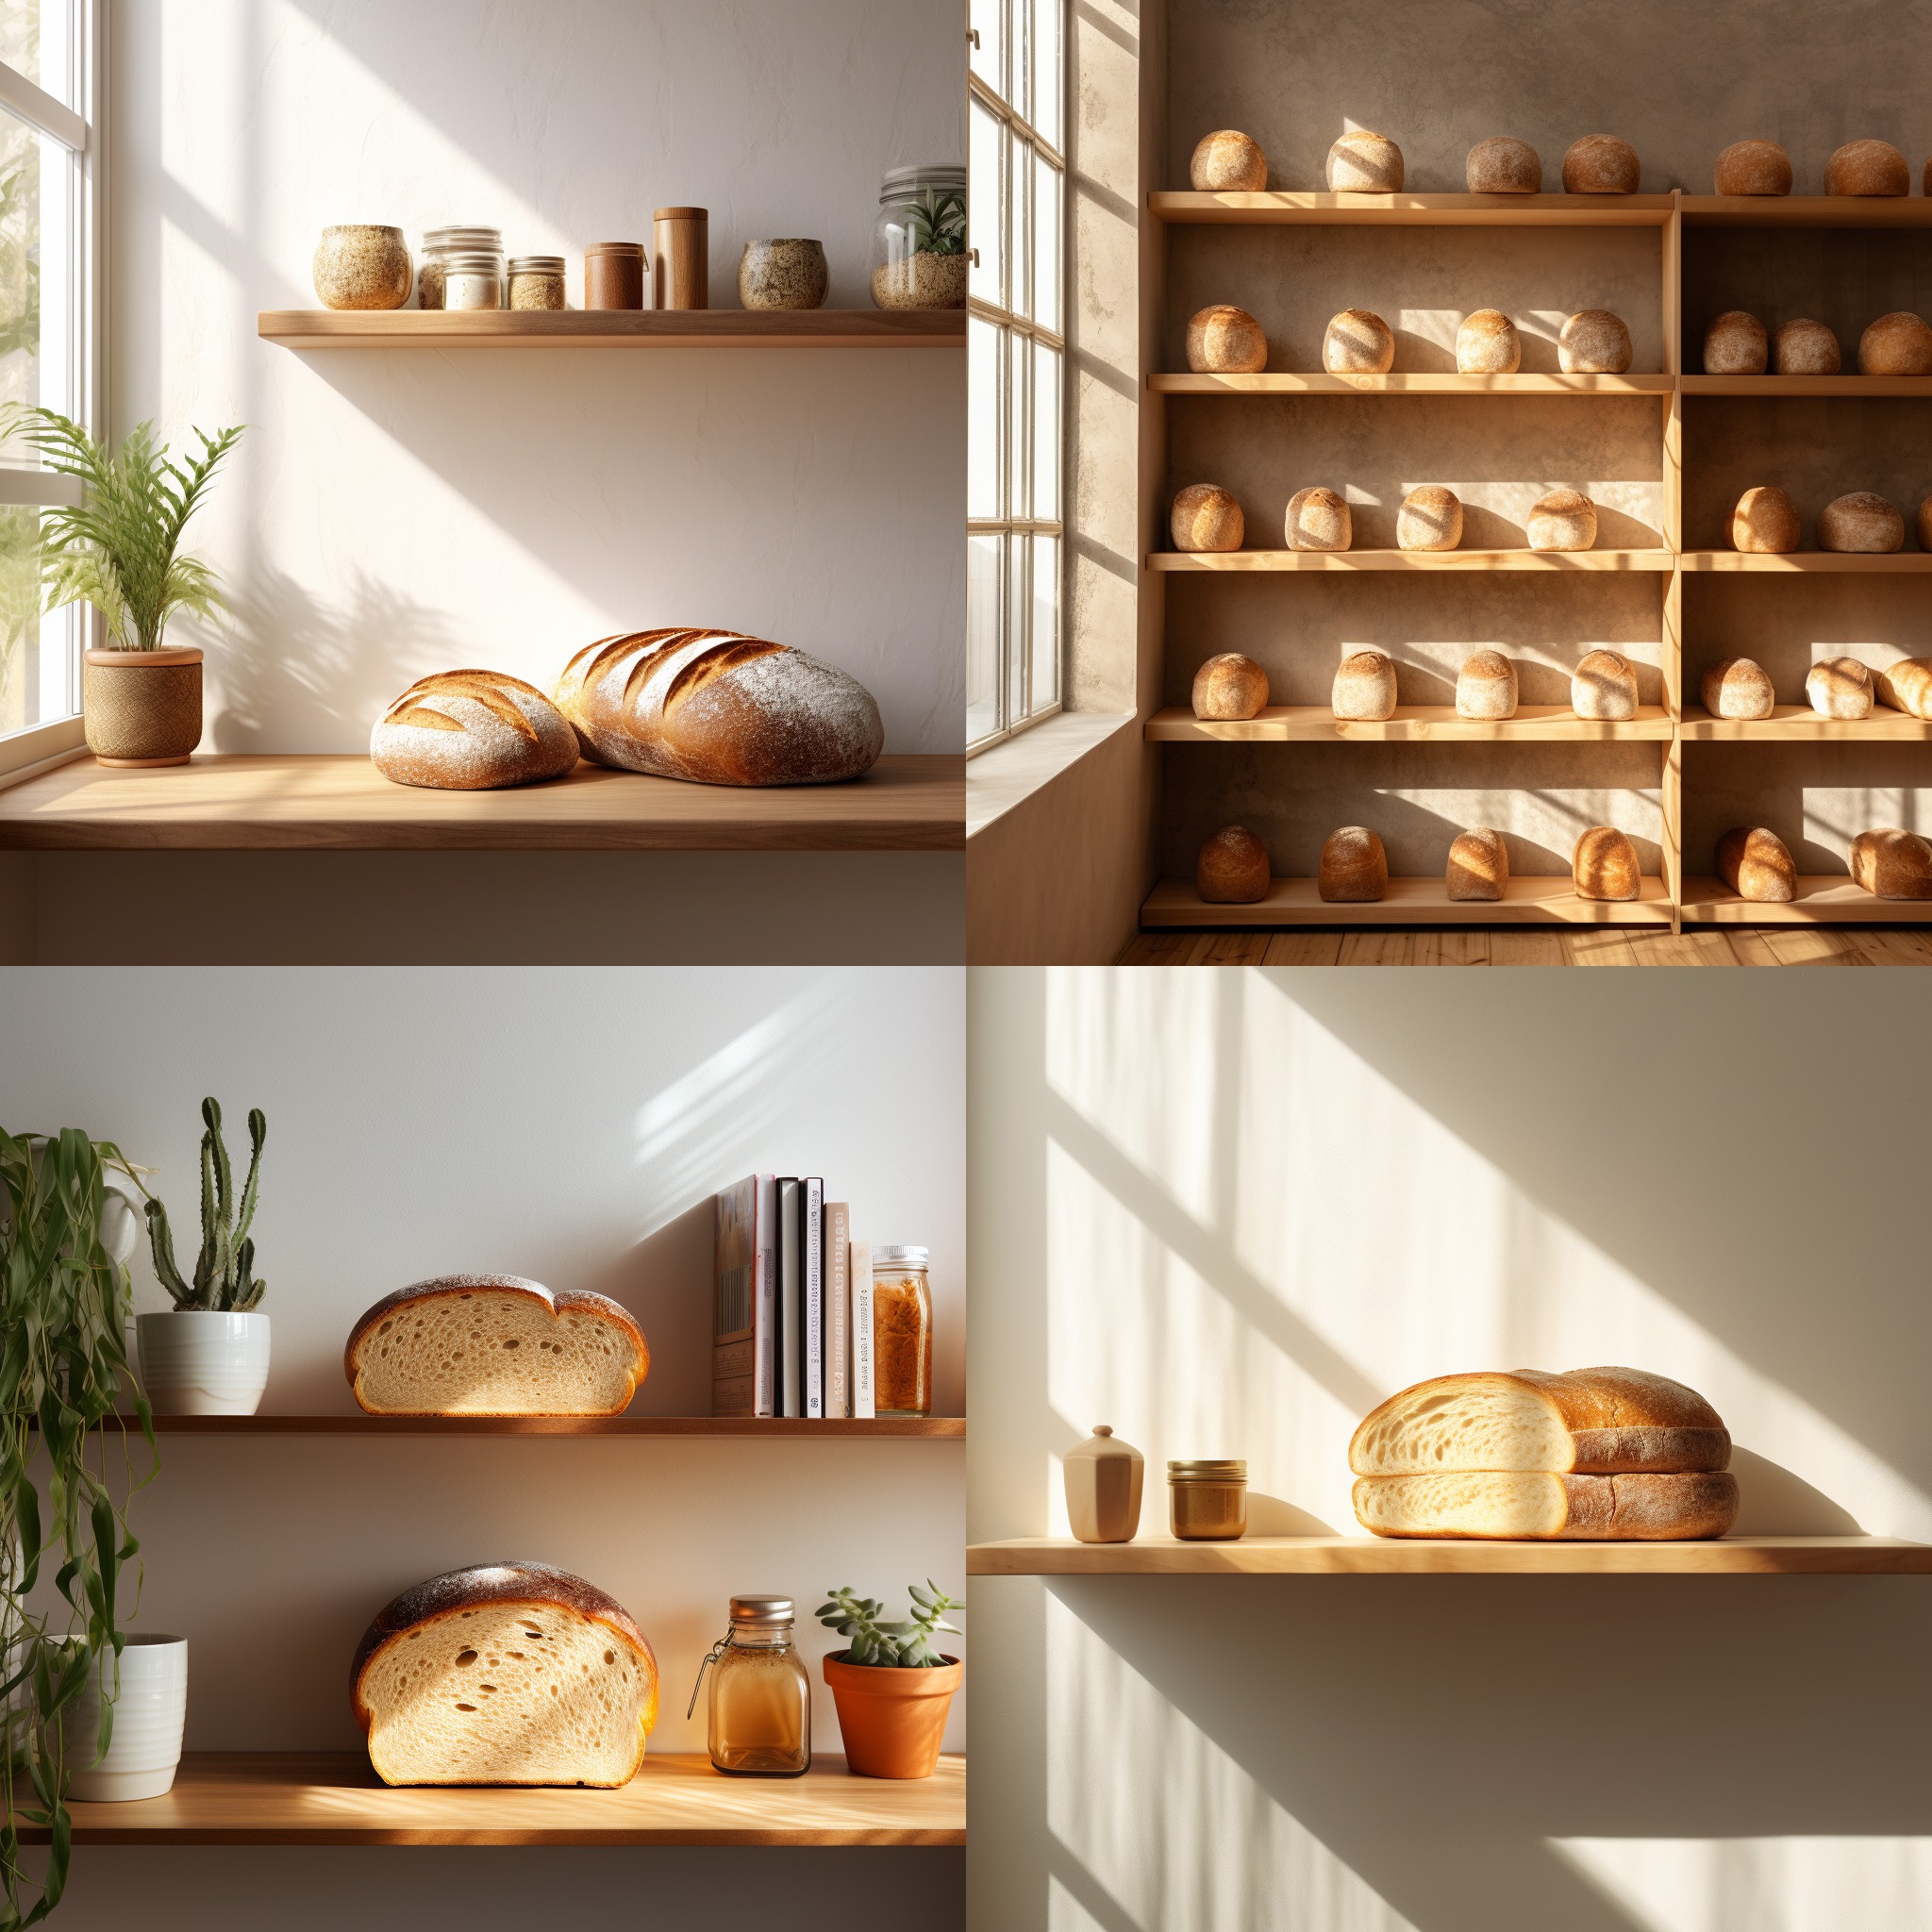 one Bread is placed on modern shelves.natural light